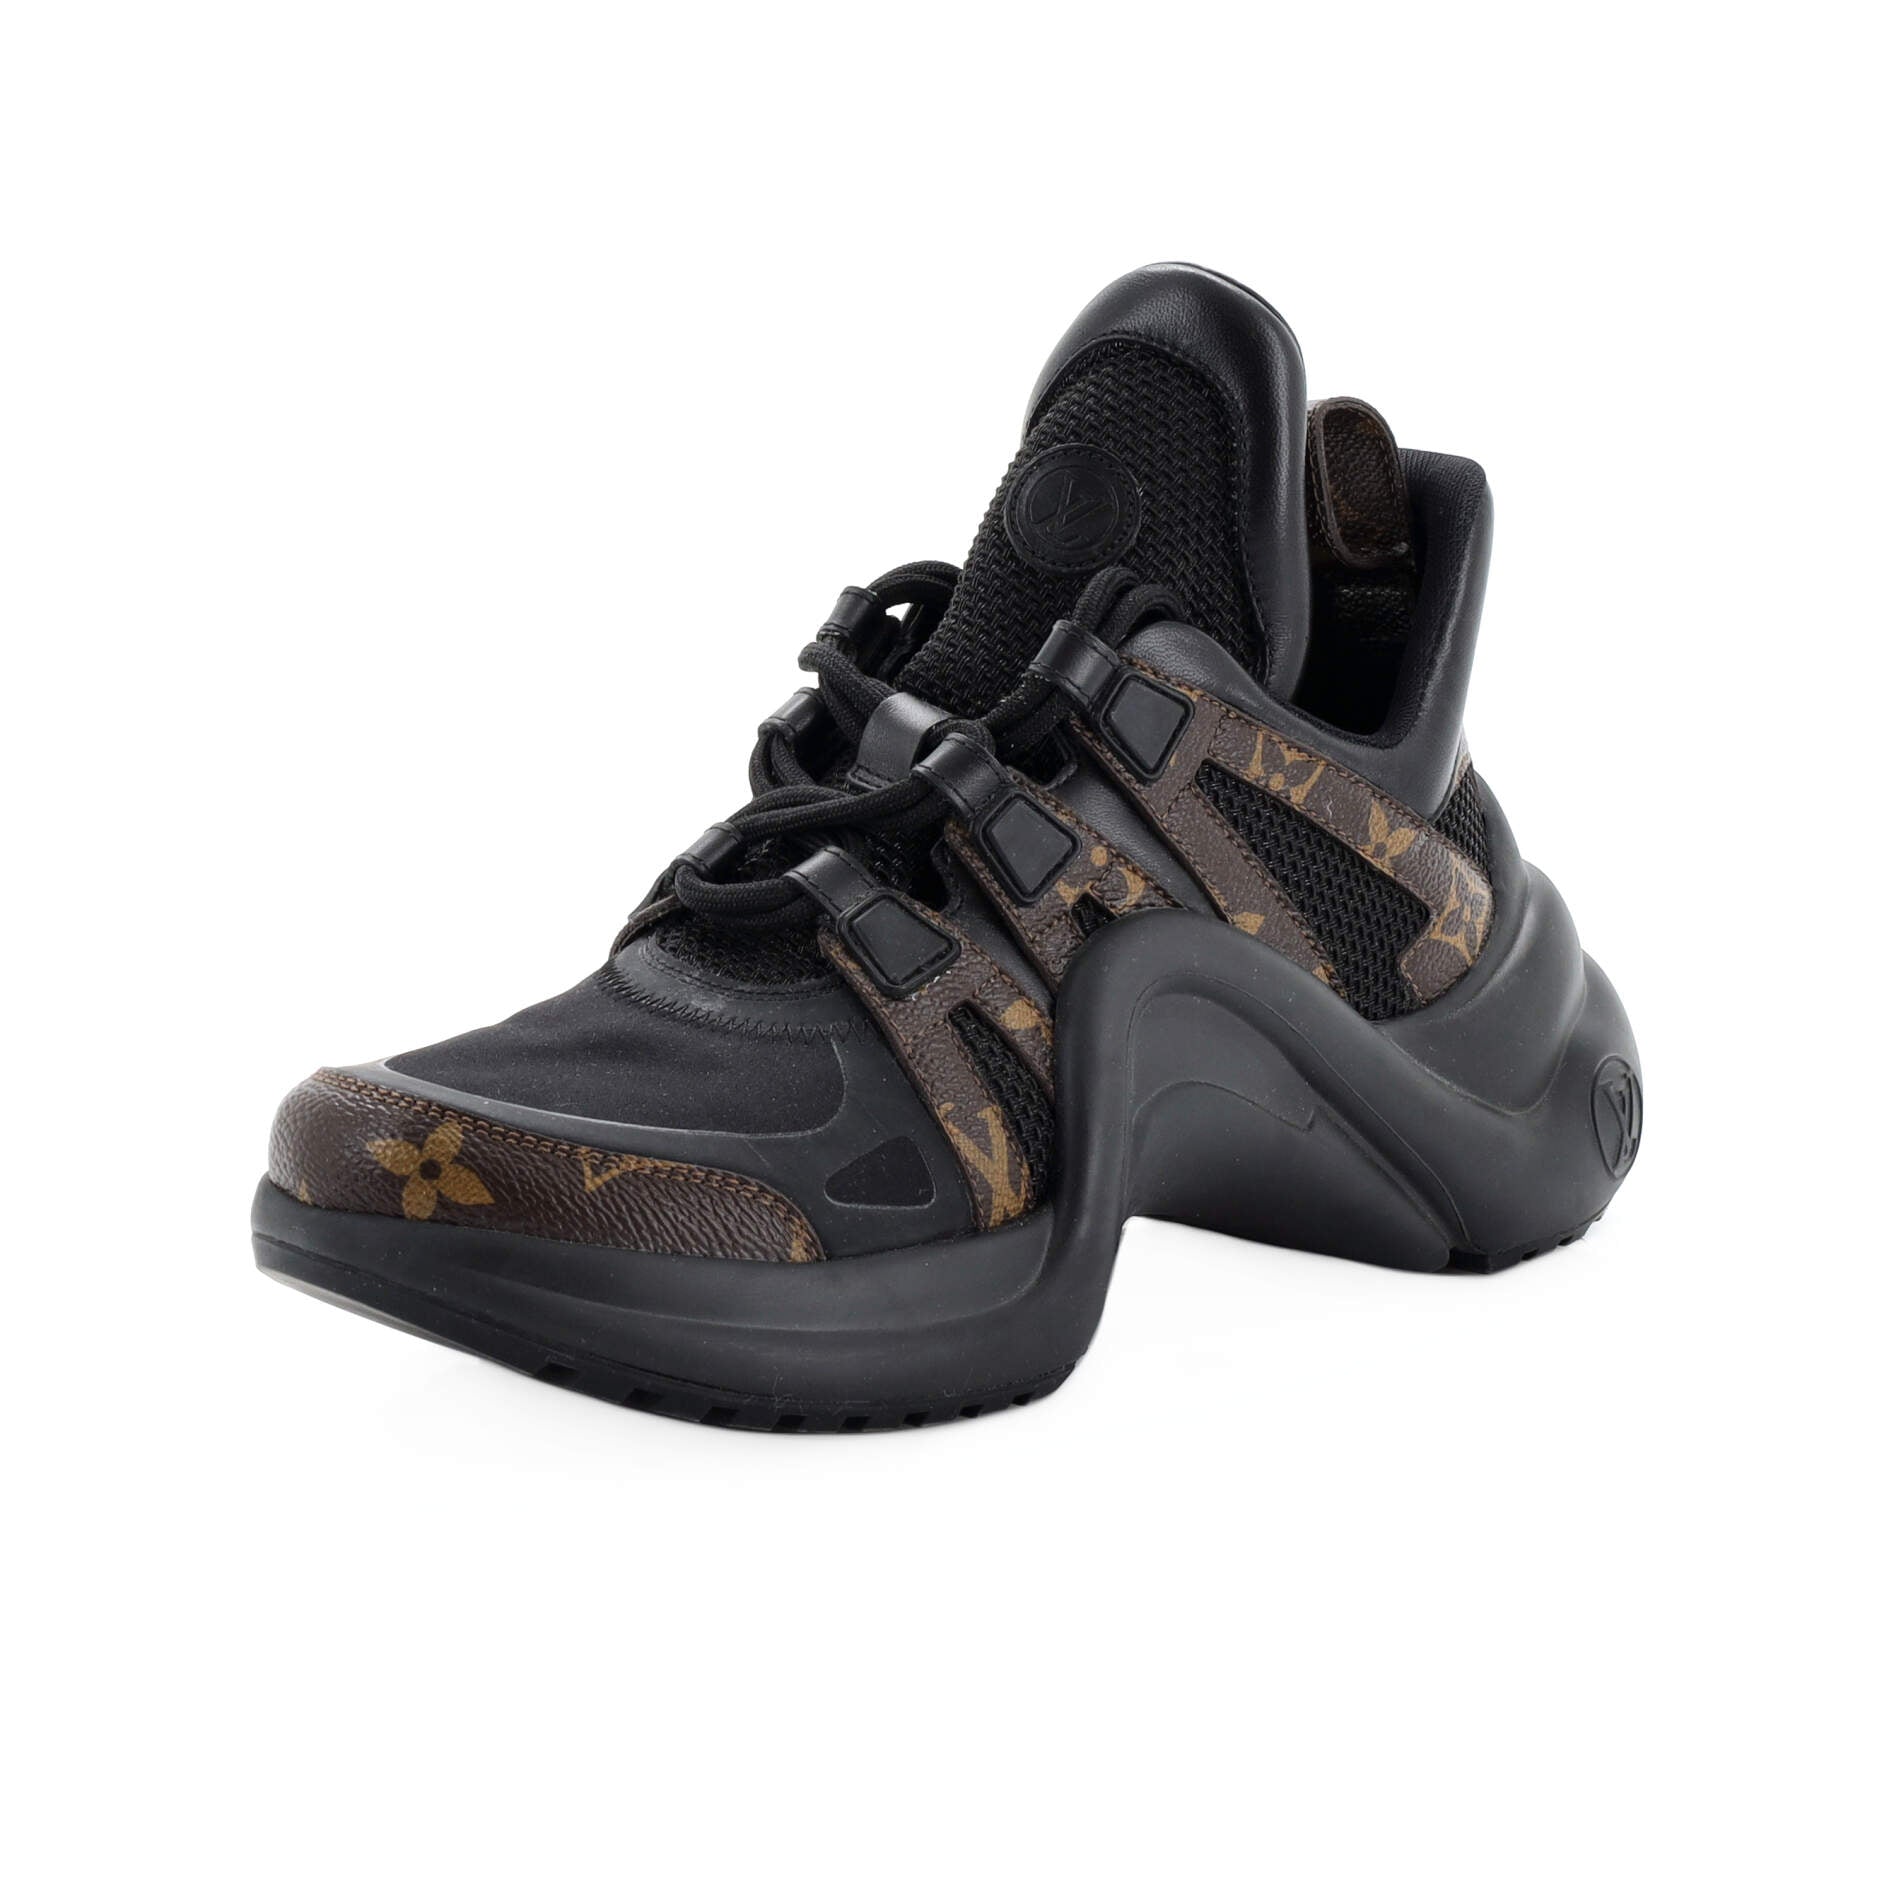 Louis Vuitton Multicolor Leather and Mesh LV Archlight Sneakers